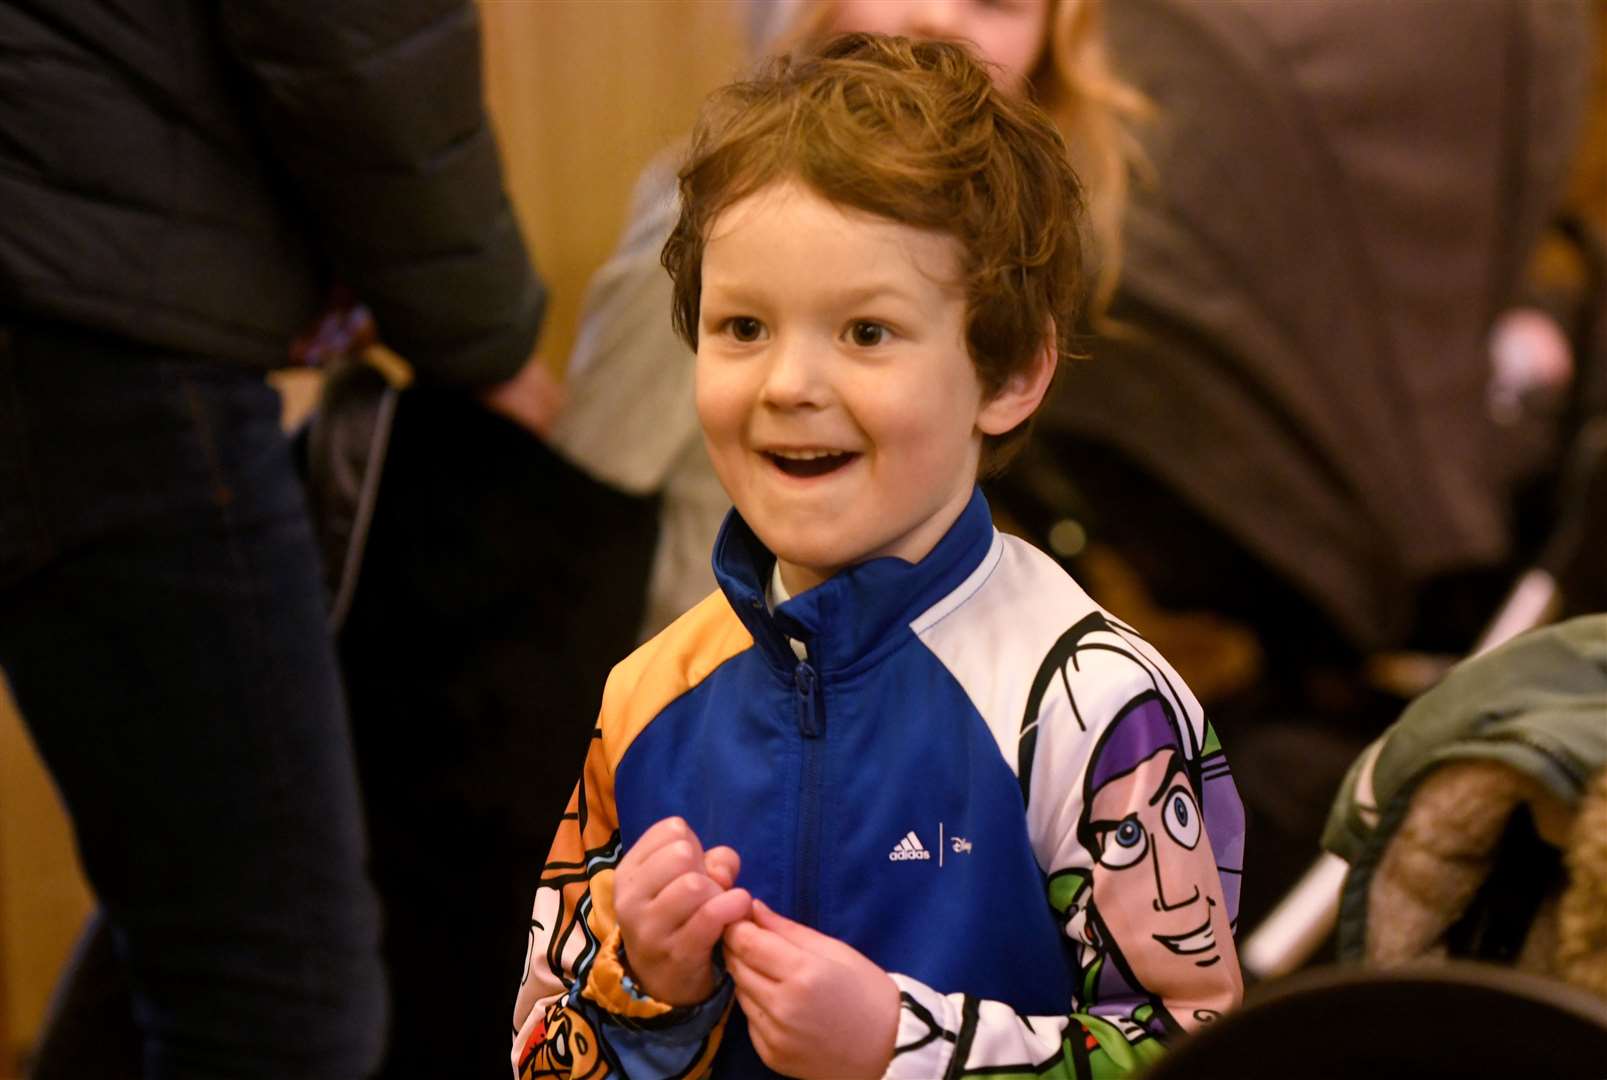 A youngster excited to see Woody & Buzz Lightyear